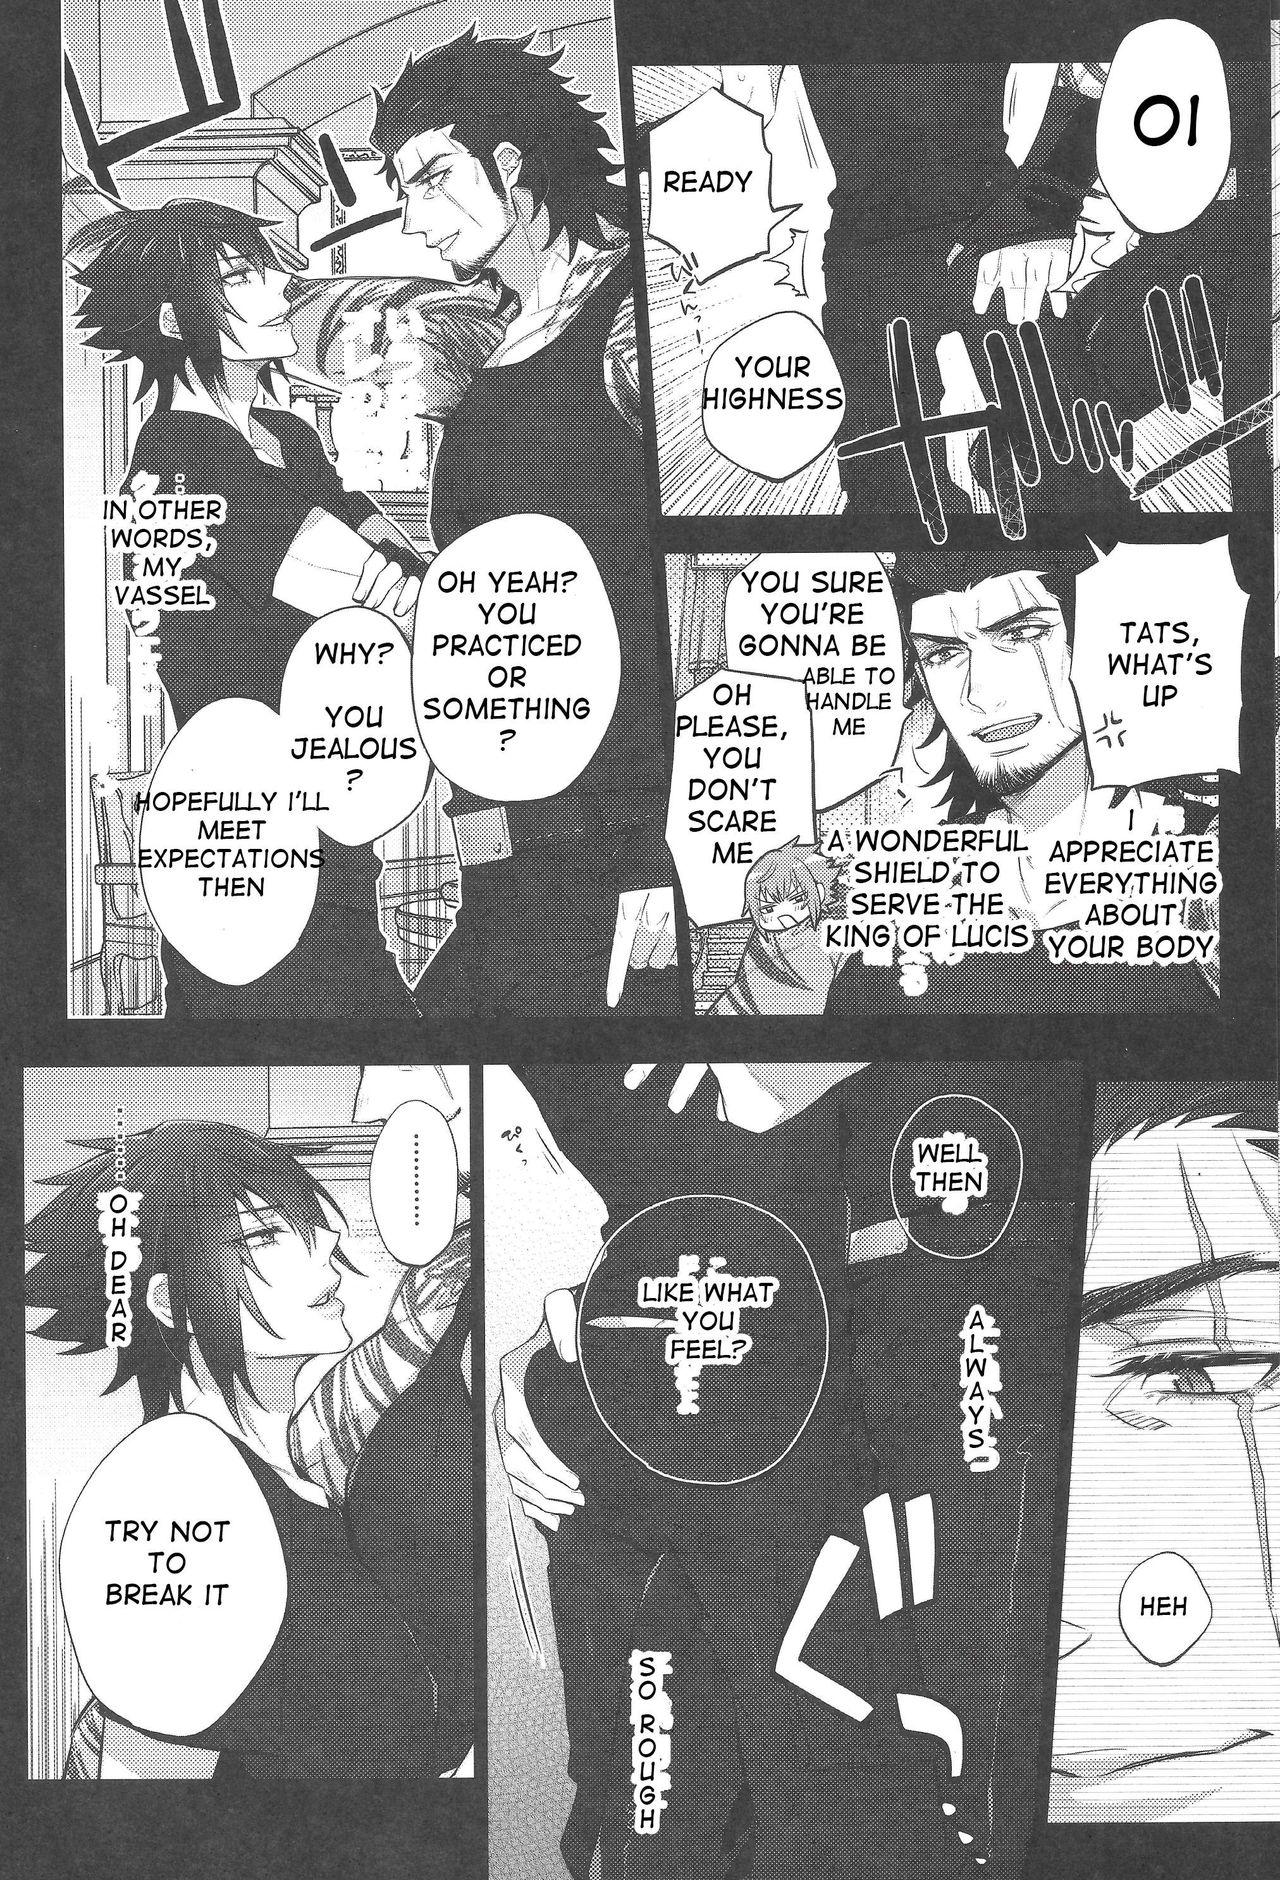 Sex Aisare ♥ Ouji Visual Kei | Our Beloved Prince - Final fantasy xv Hunks - Page 9